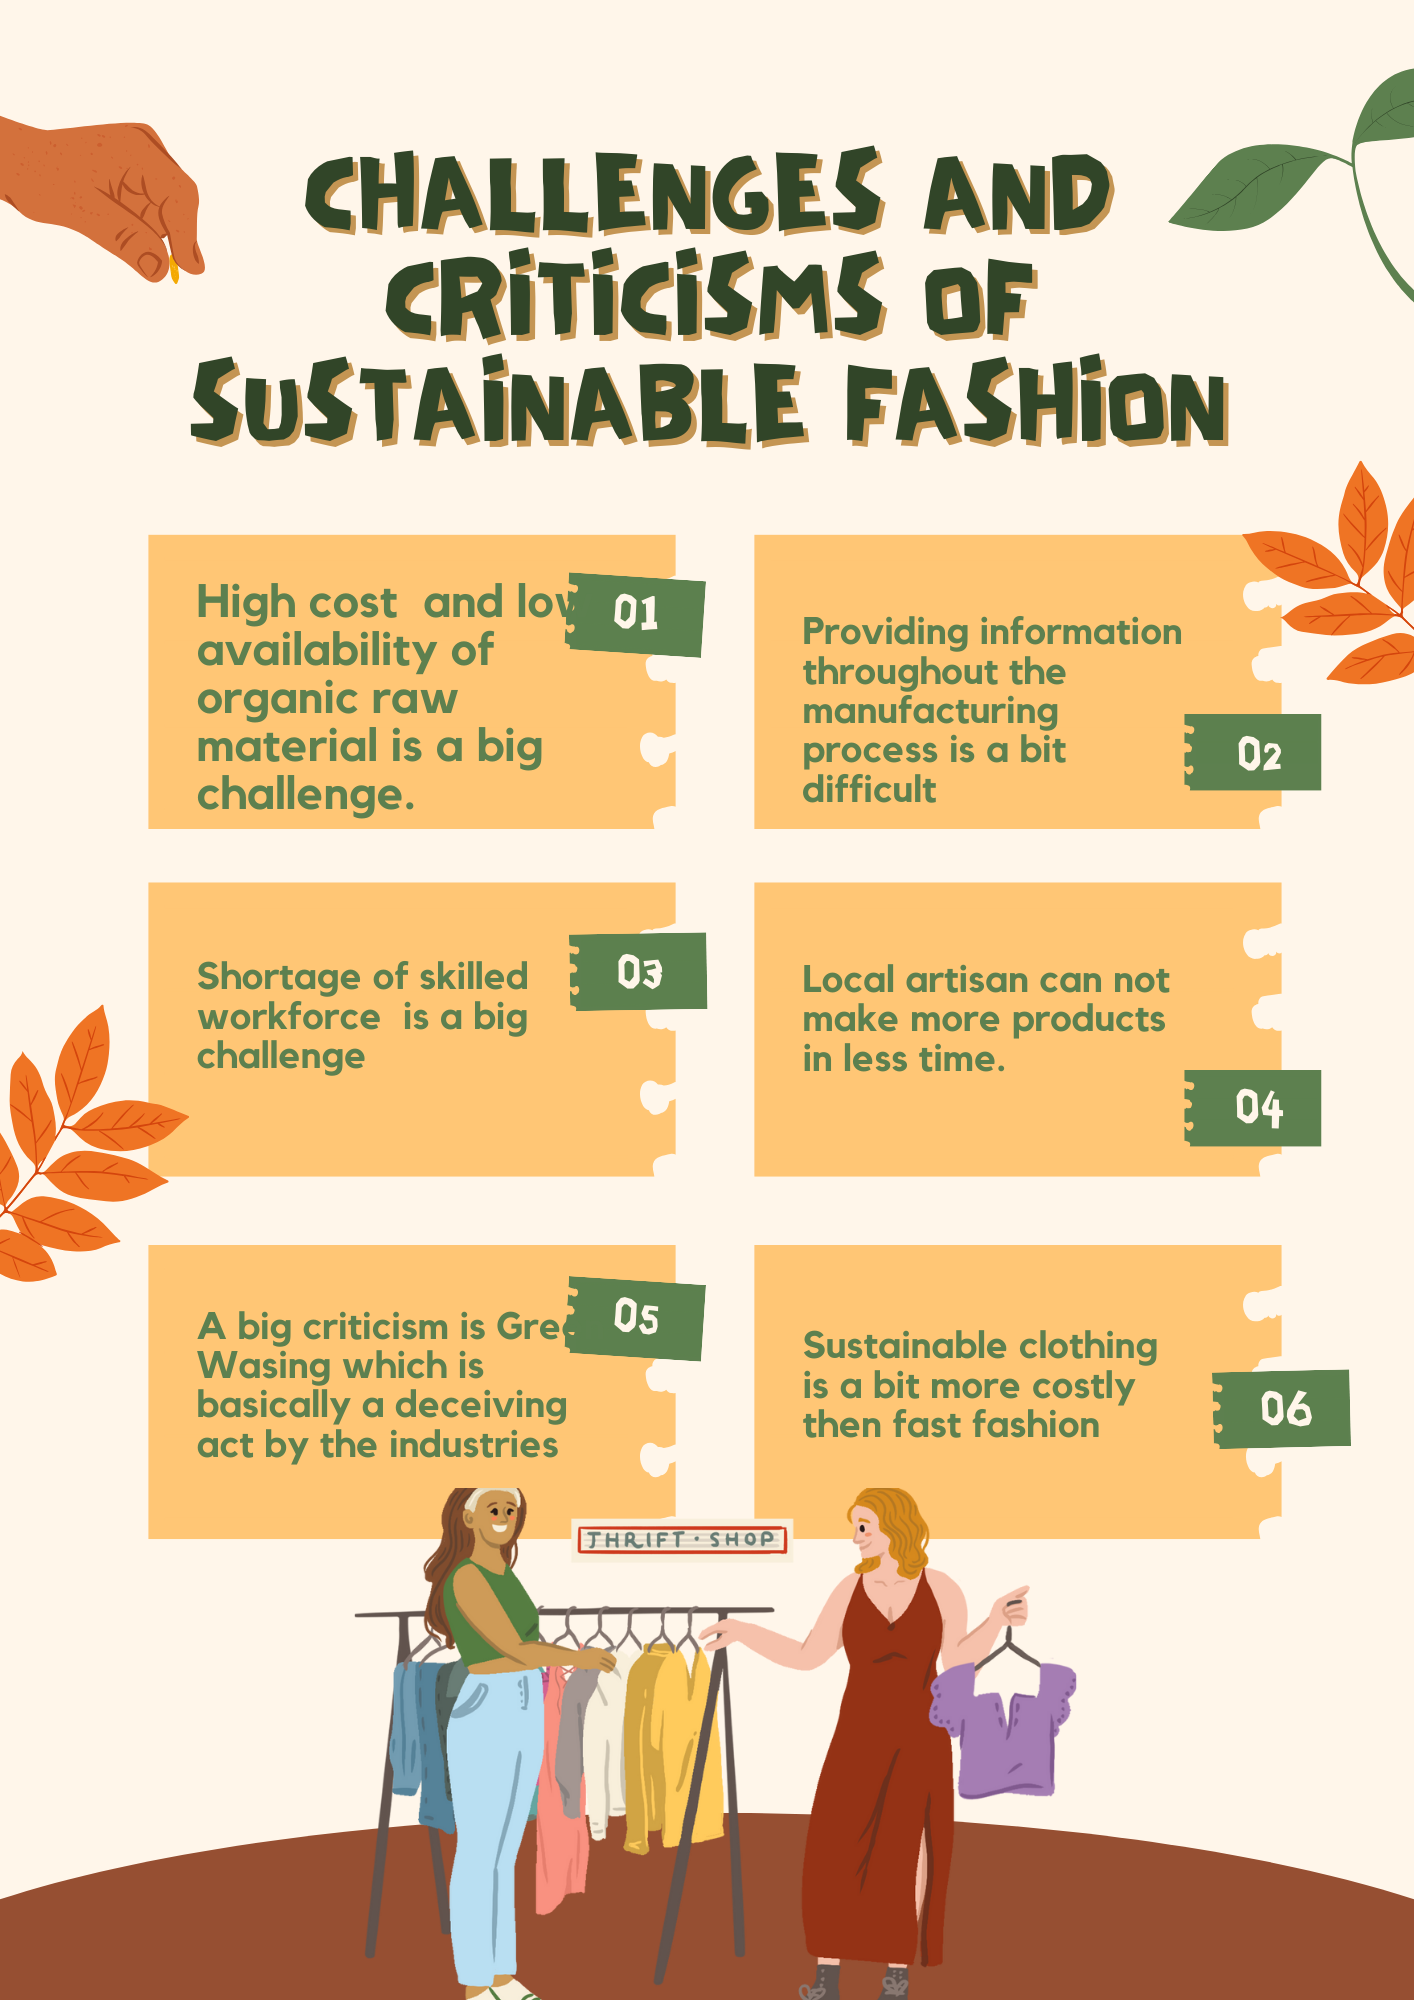 Addressing sustainability challenges in fashion: high raw material costs, opaque supply chains, skilled labor shortages, global complexities, and consumer education gaps.